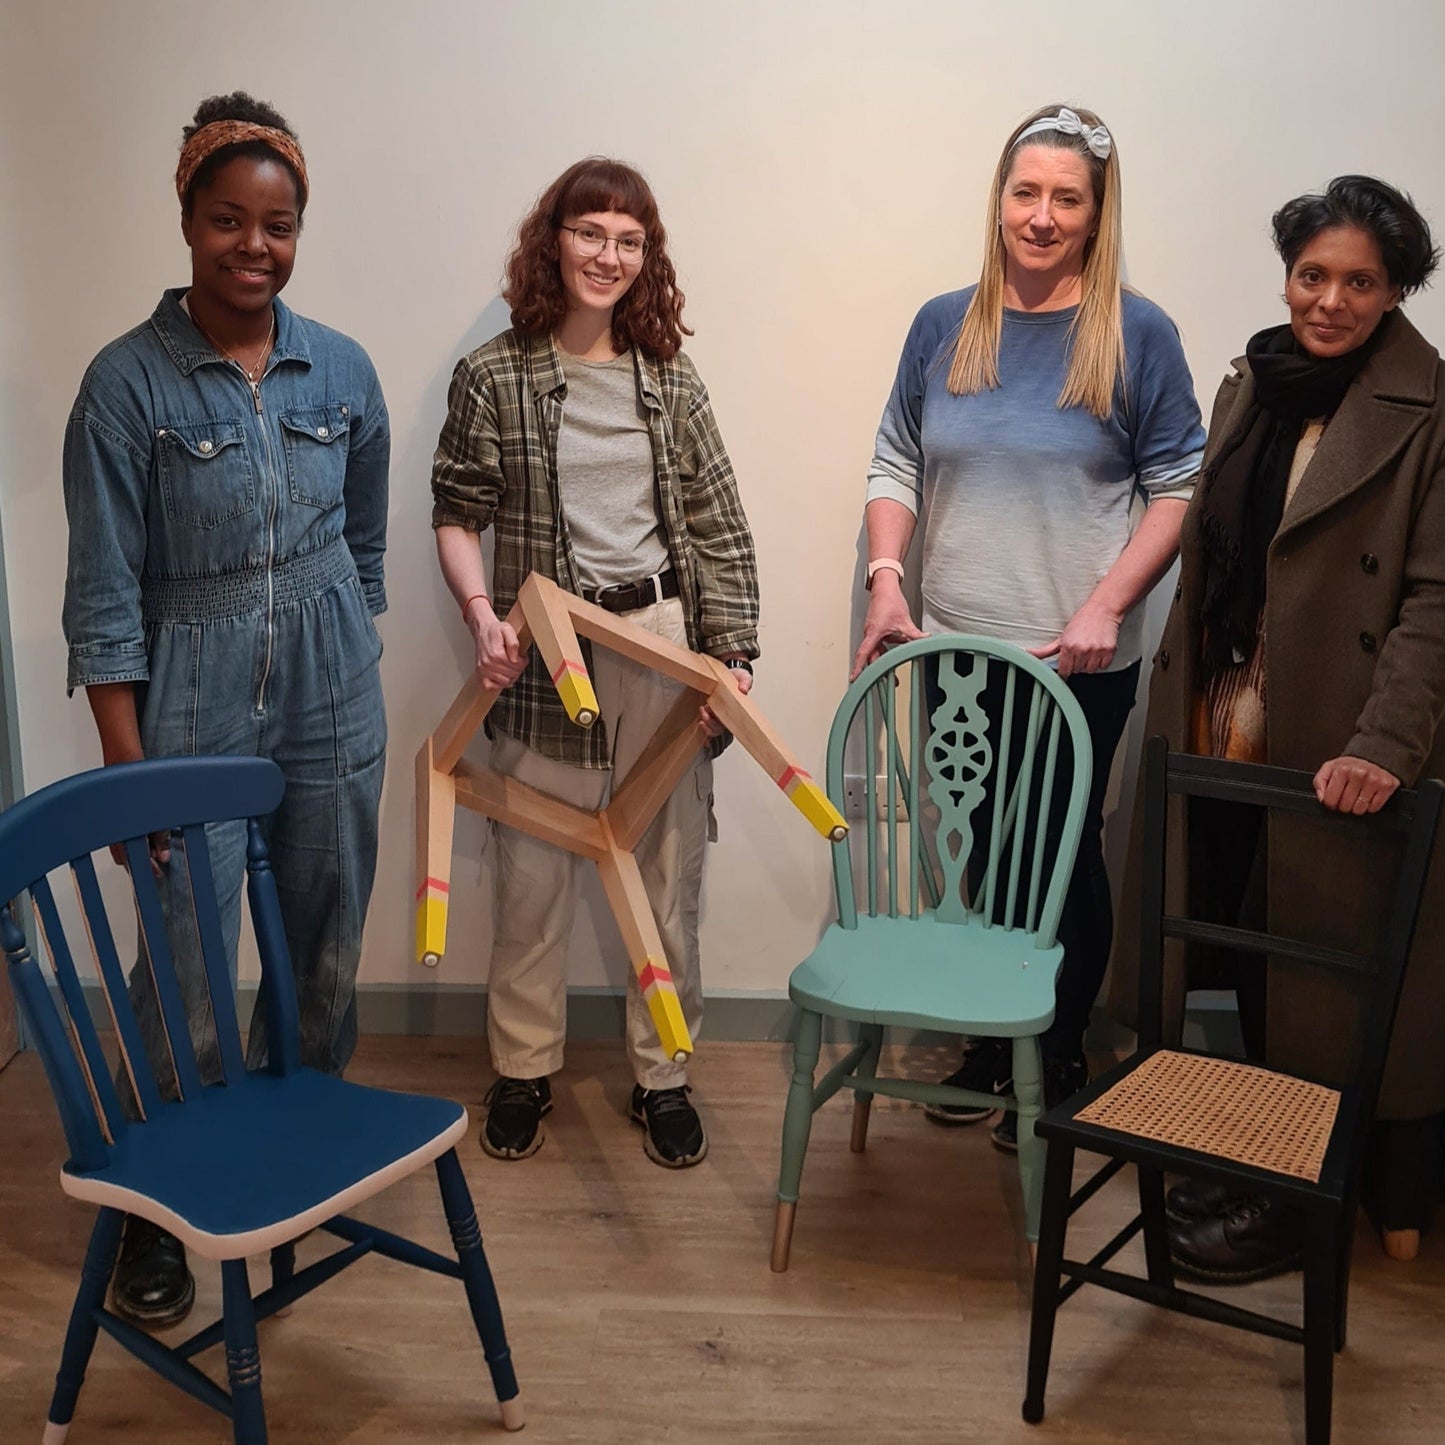 Full Day Chair Upcycling Workshop - Sunday 30th June